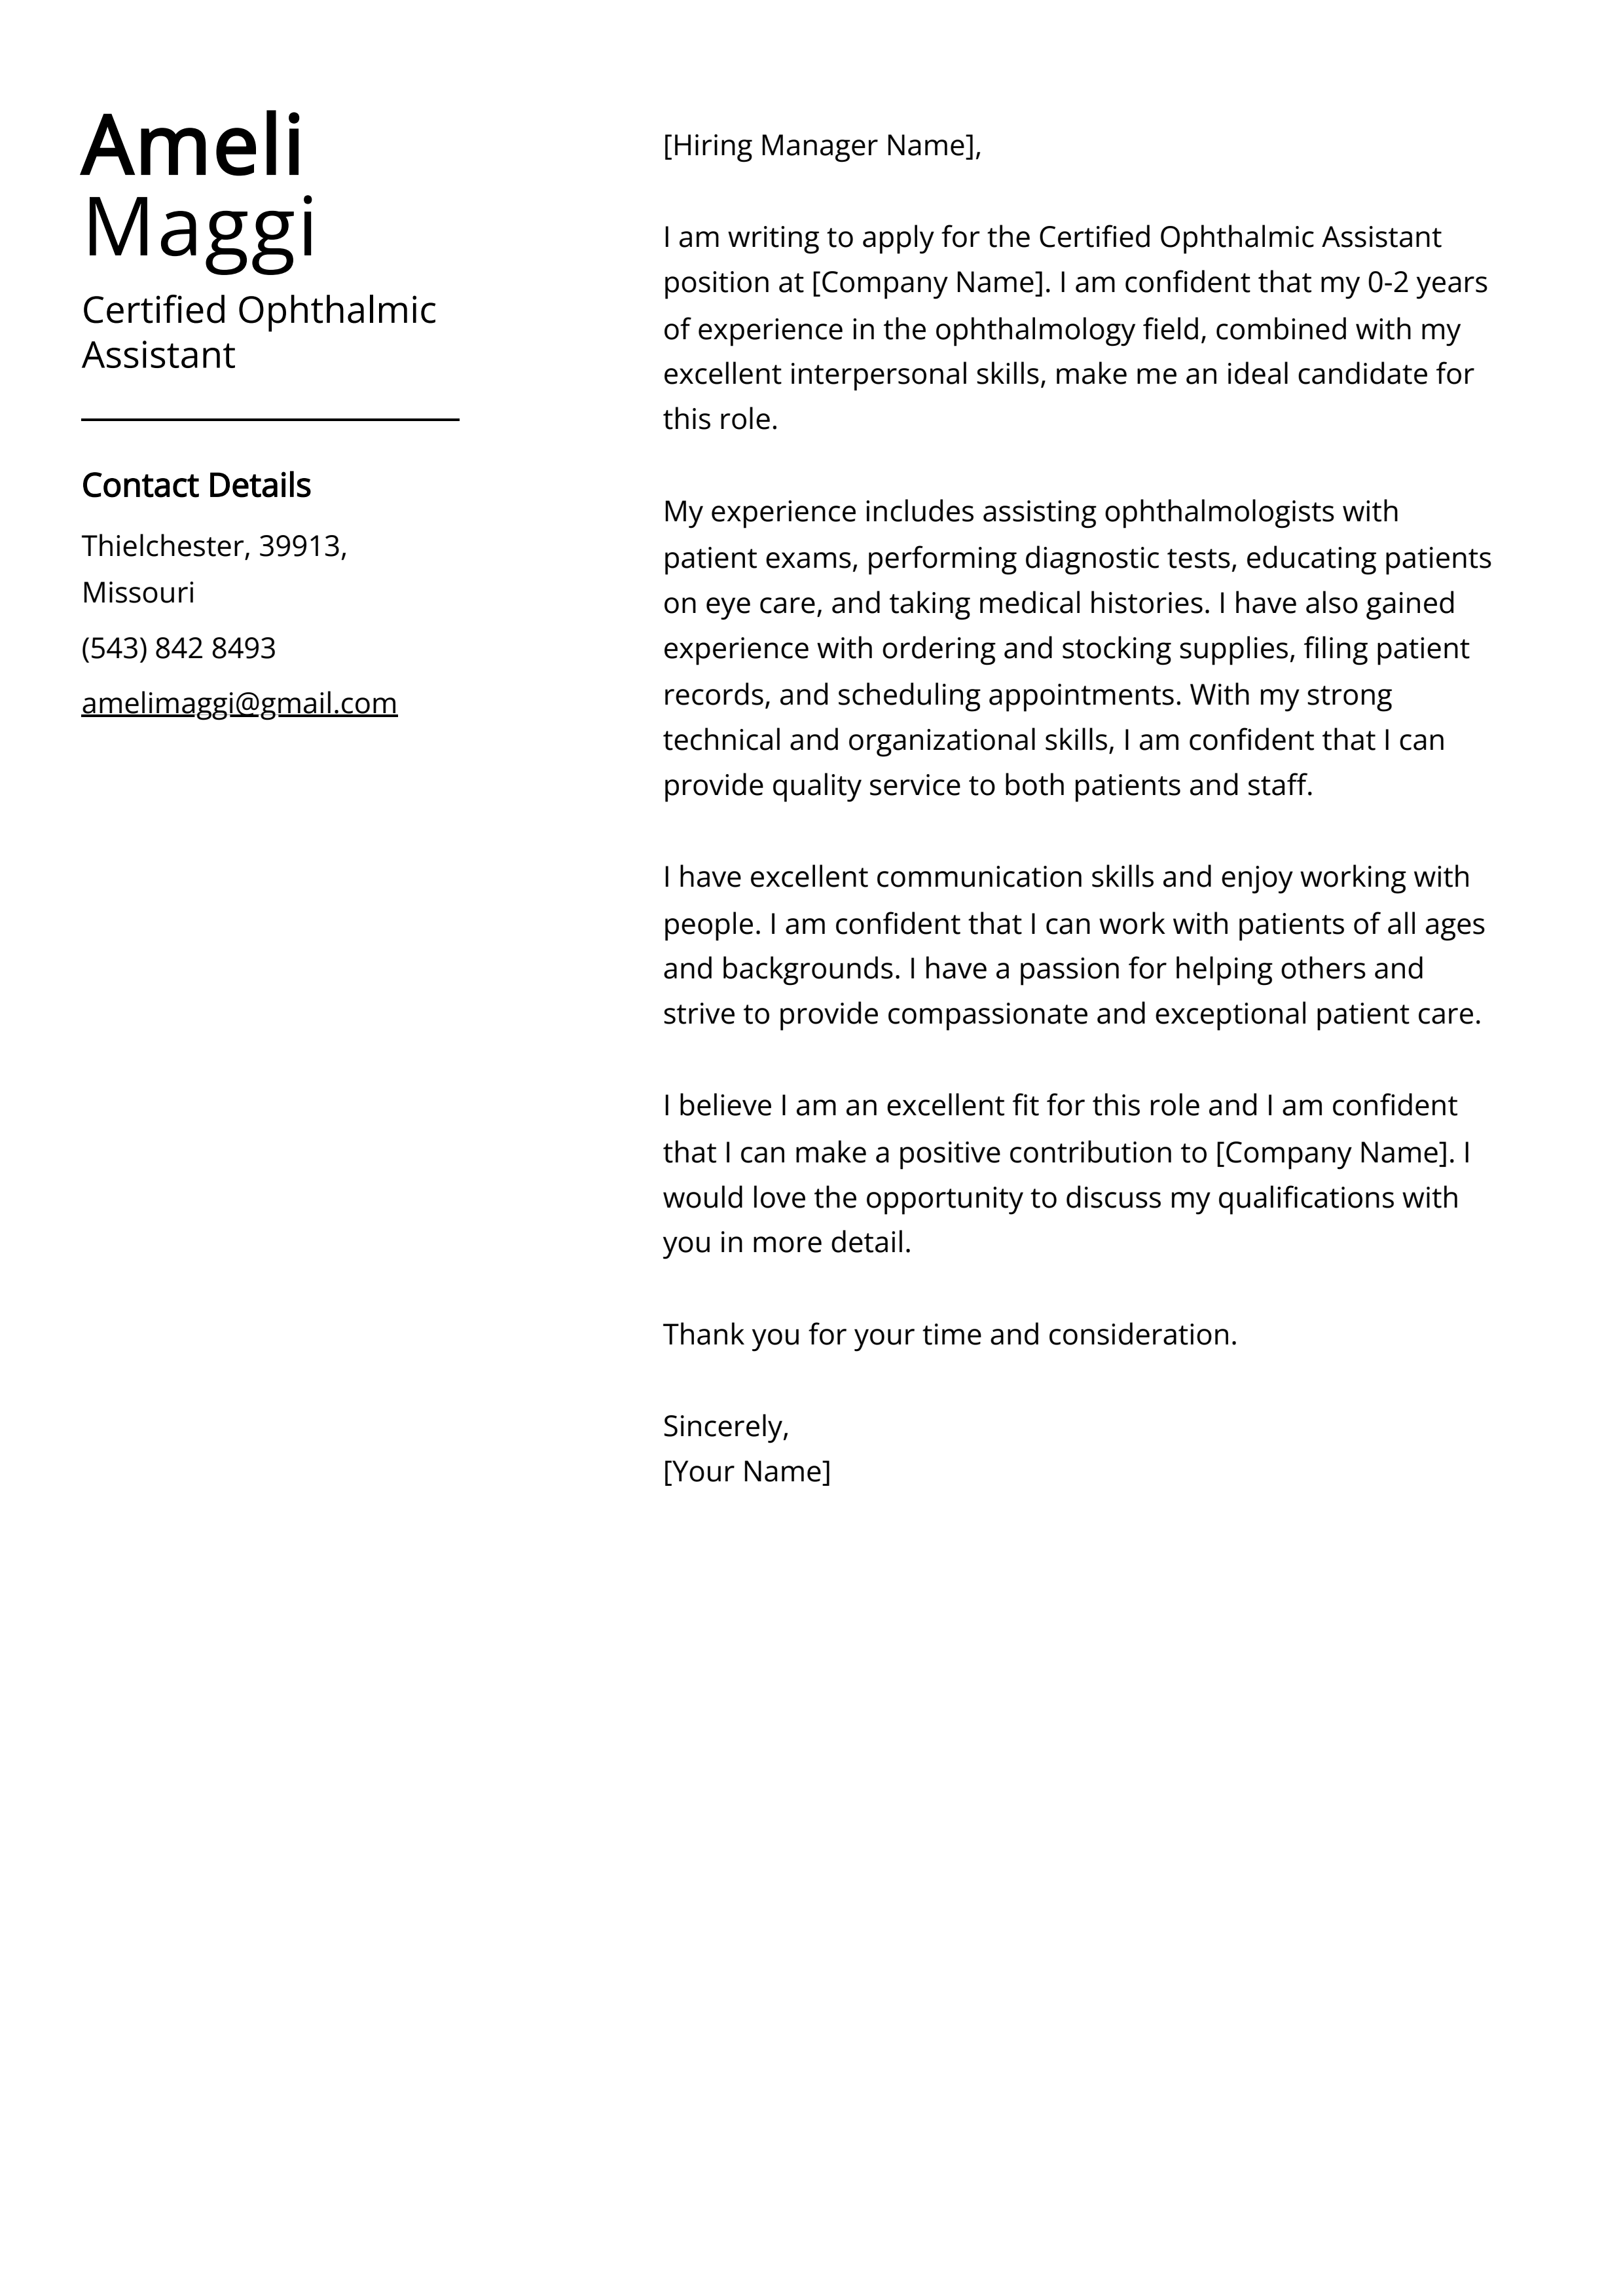 Certified Ophthalmic Assistant Cover Letter Example